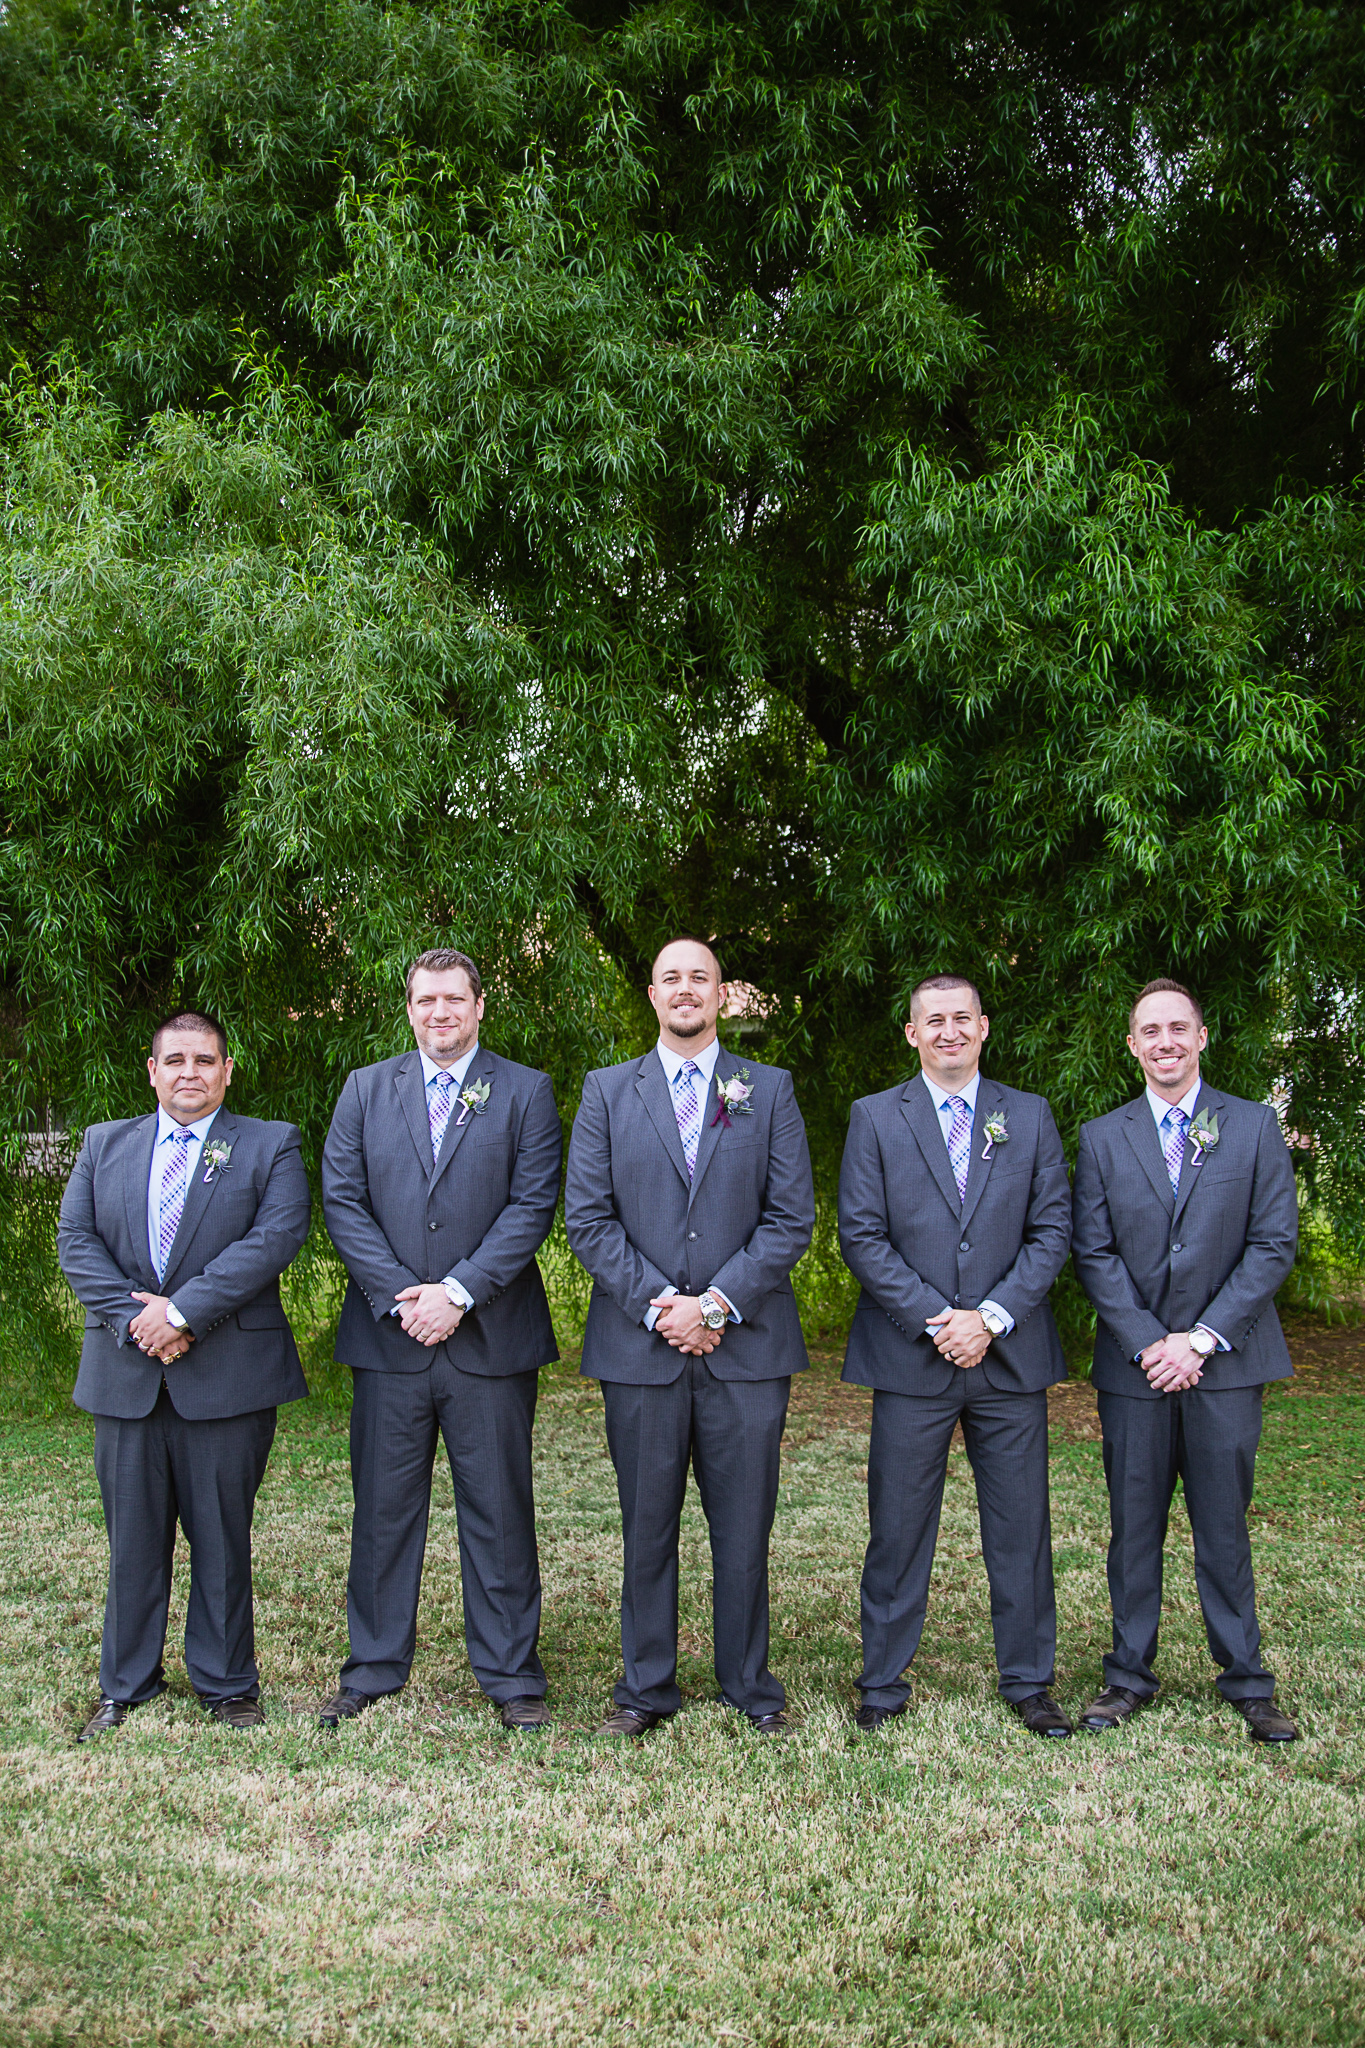 Groom and groomsmen in grey suits with dusty blue and lavender accents by Phoenix wedding photographer PMA Photography.